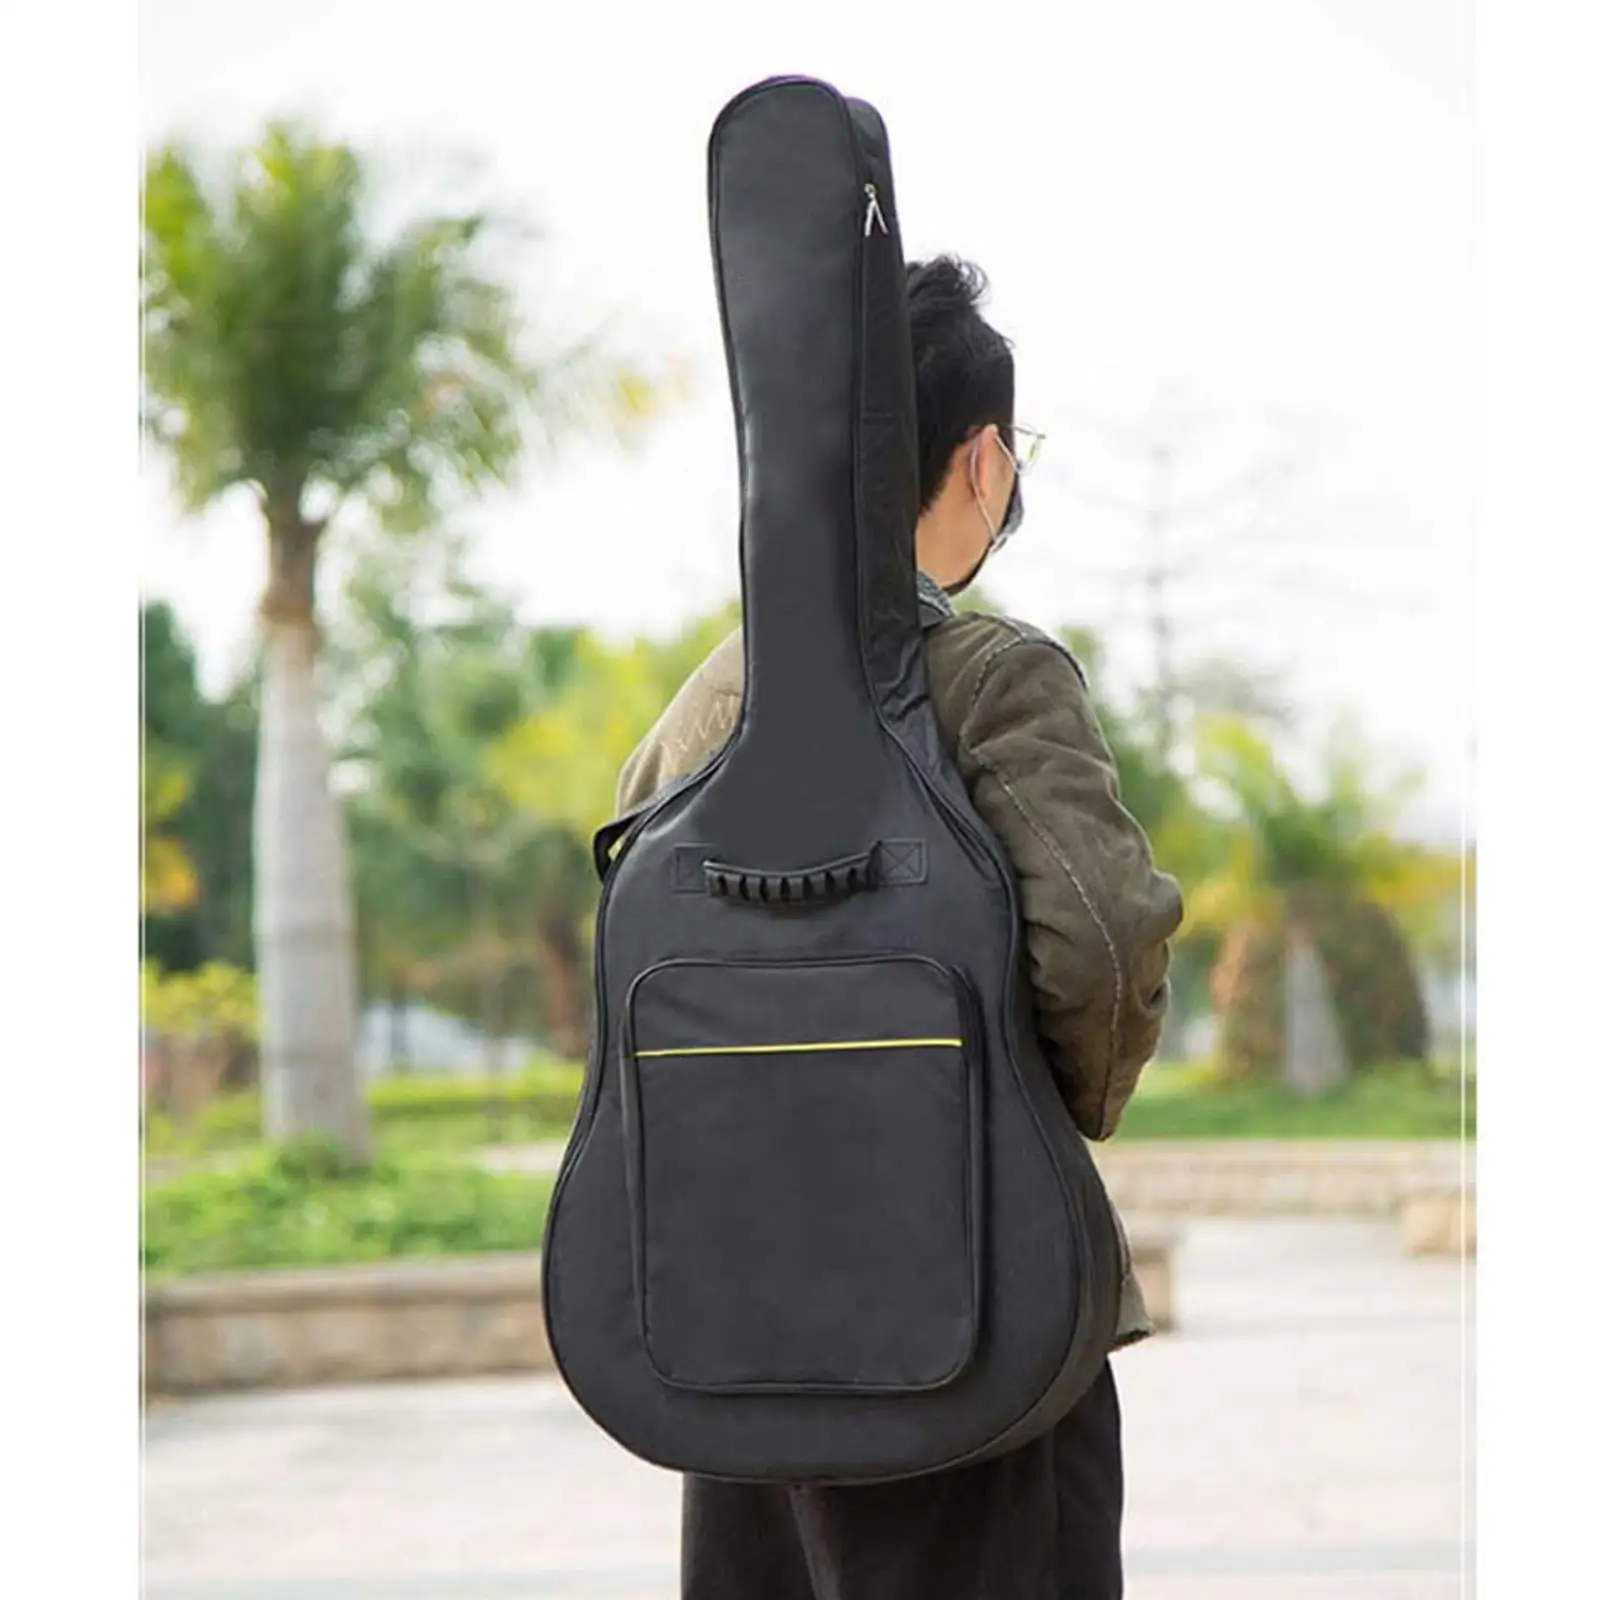 Guitar Bag Full Size Thick 12mm Padding Water-Resistant Oxford Cloth 